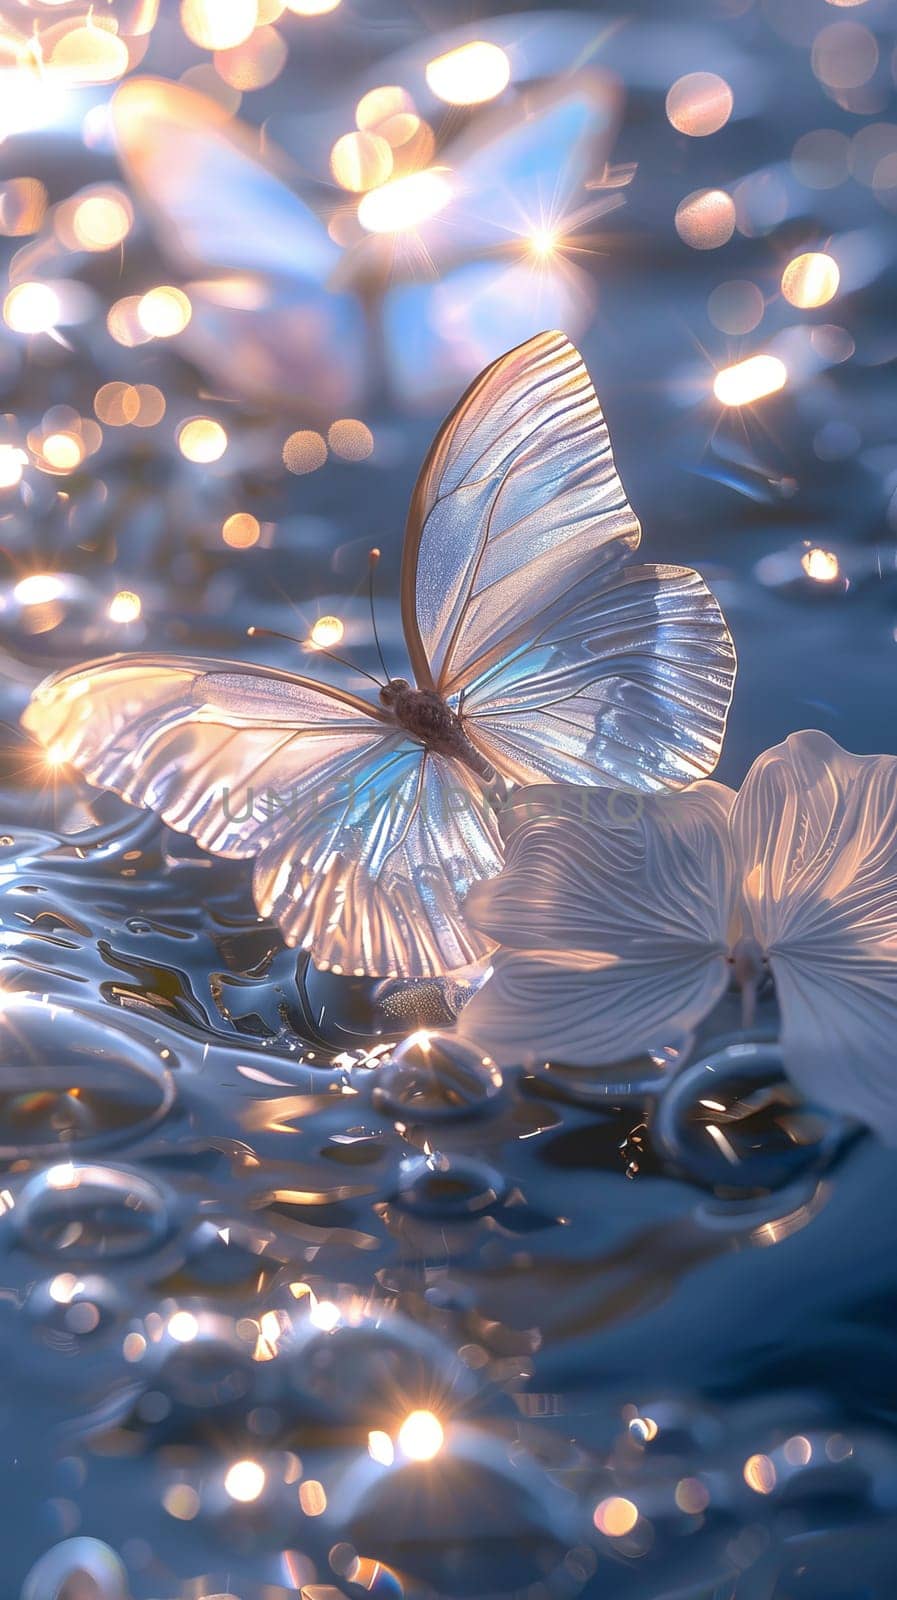 A butterfly is floating on the surface of a body of water. The water is illuminated by the light of the sun, creating a serene and peaceful atmosphere